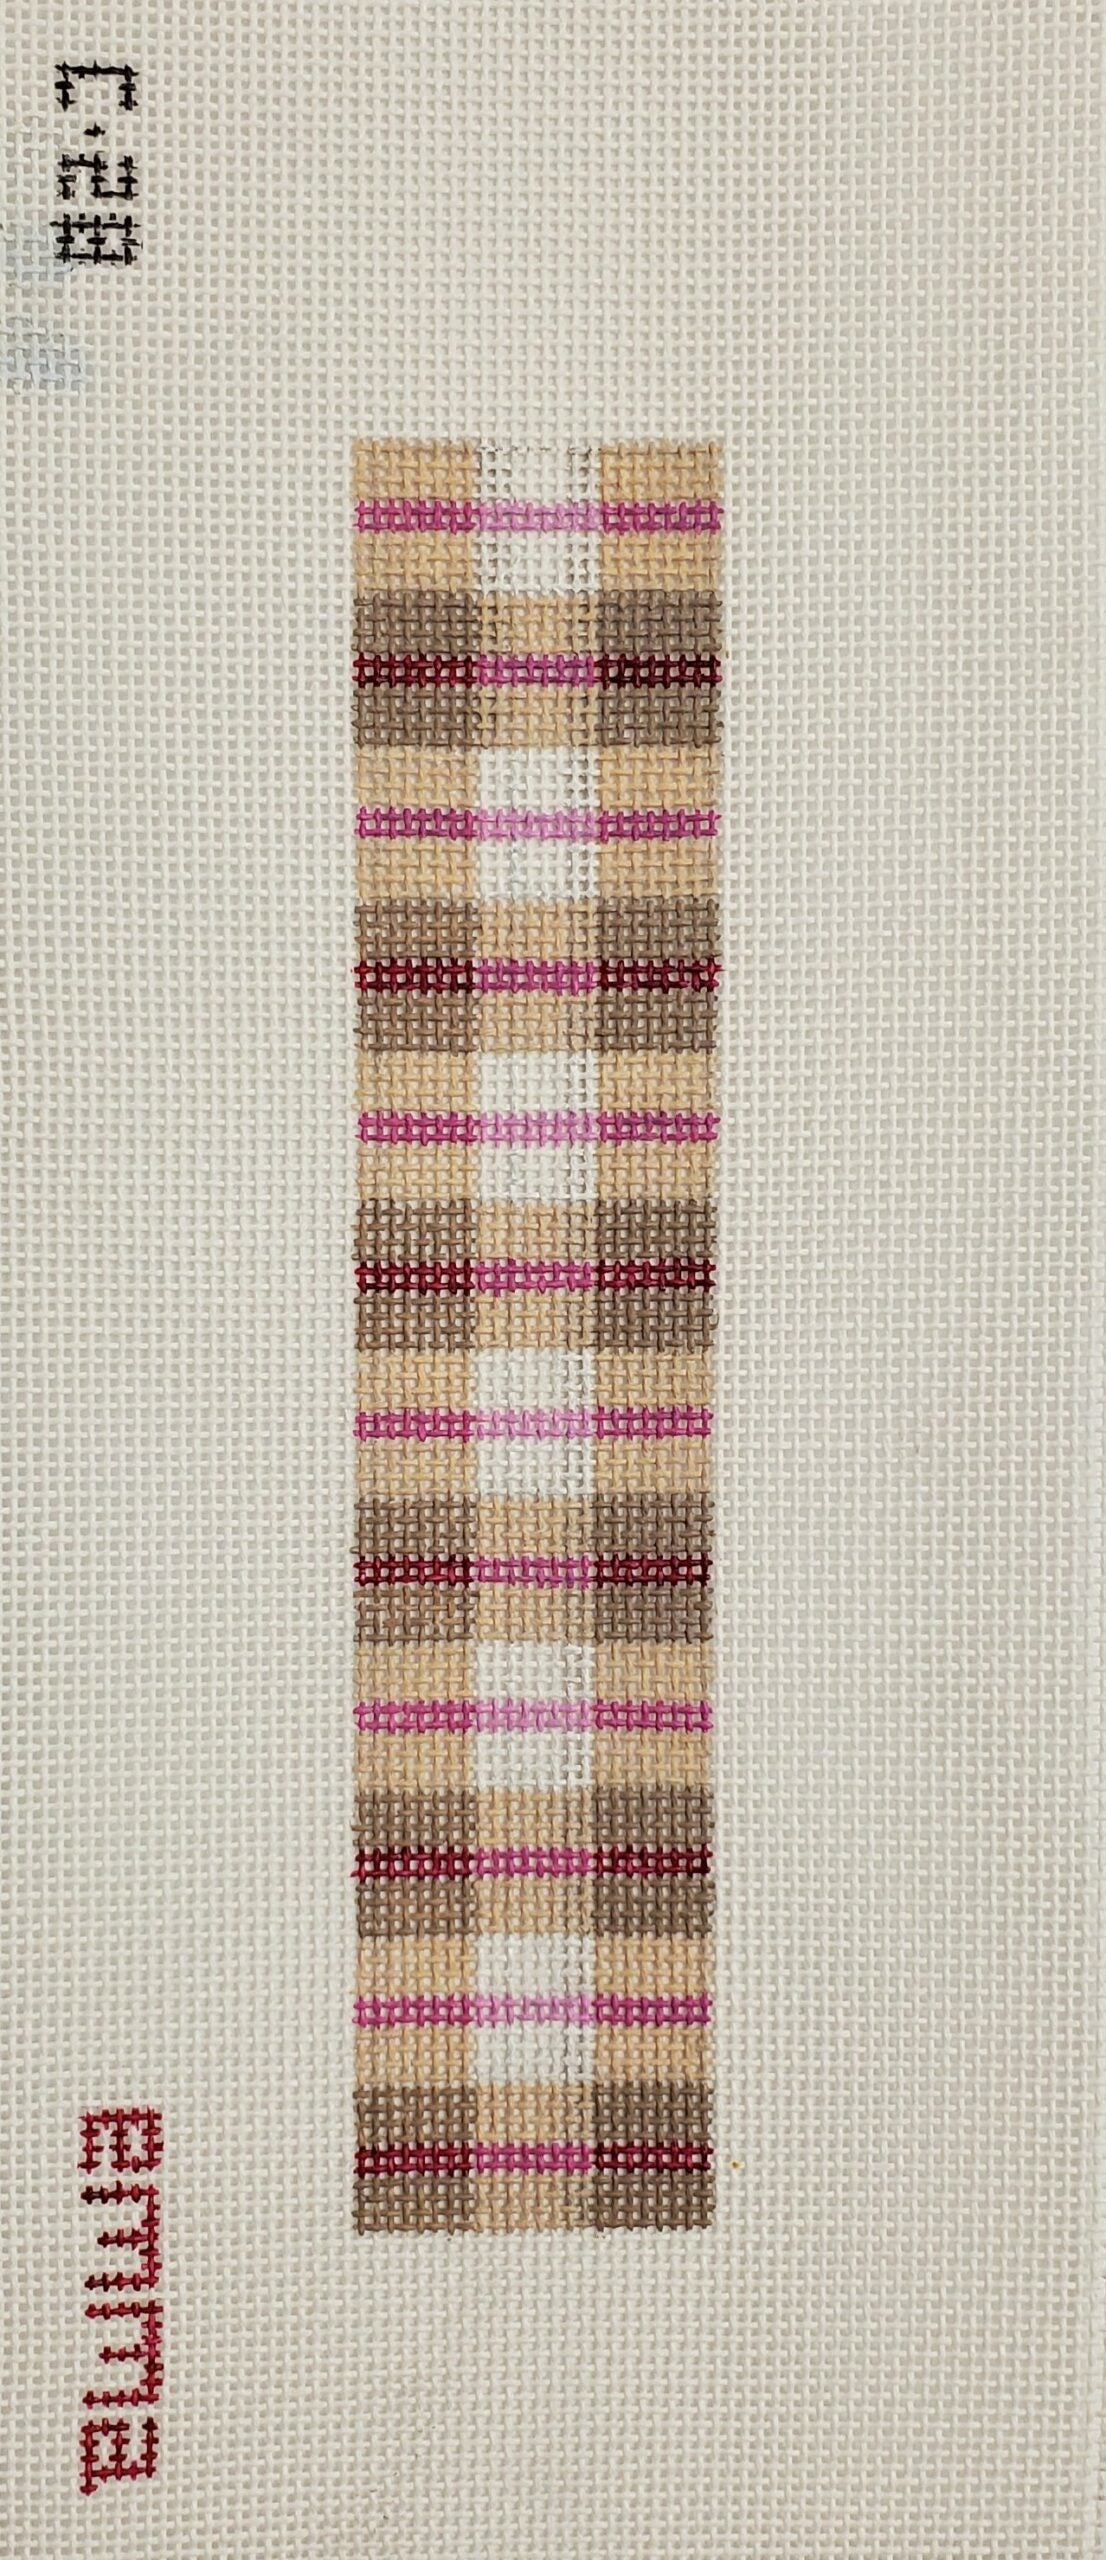 C28 Pink and Brown Cuff